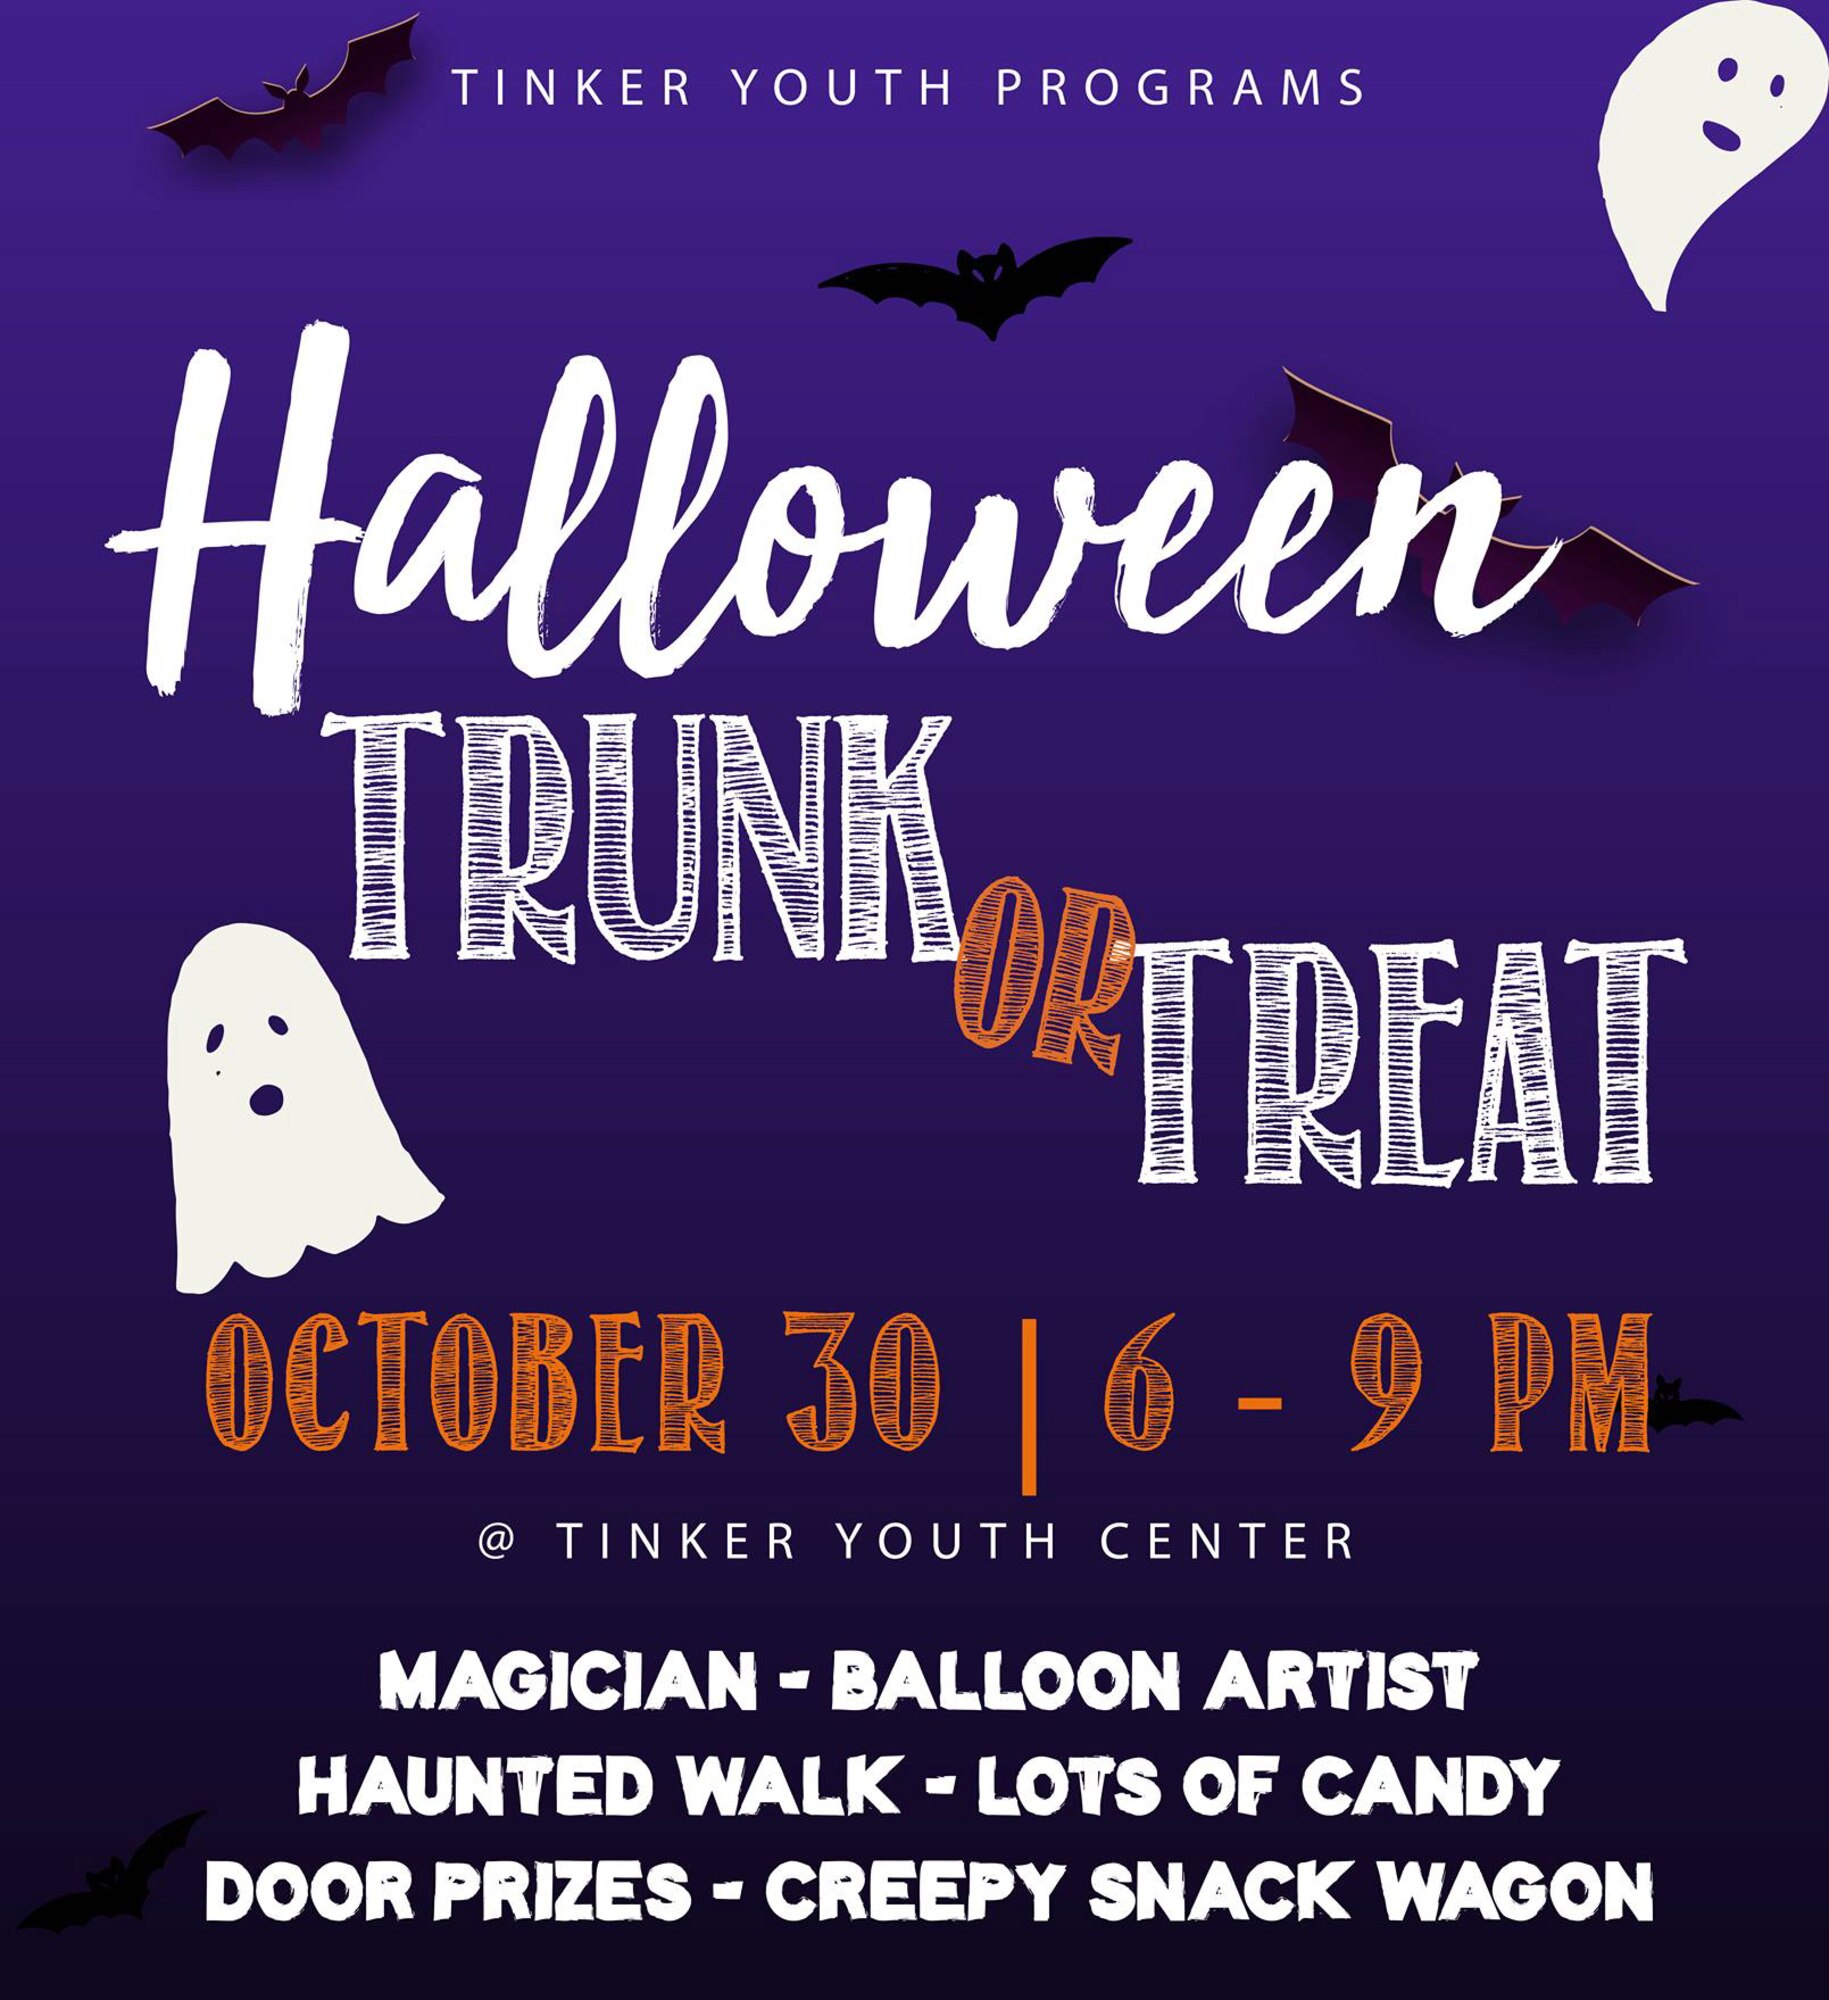 Youth Programs Trunk or Treat flyer